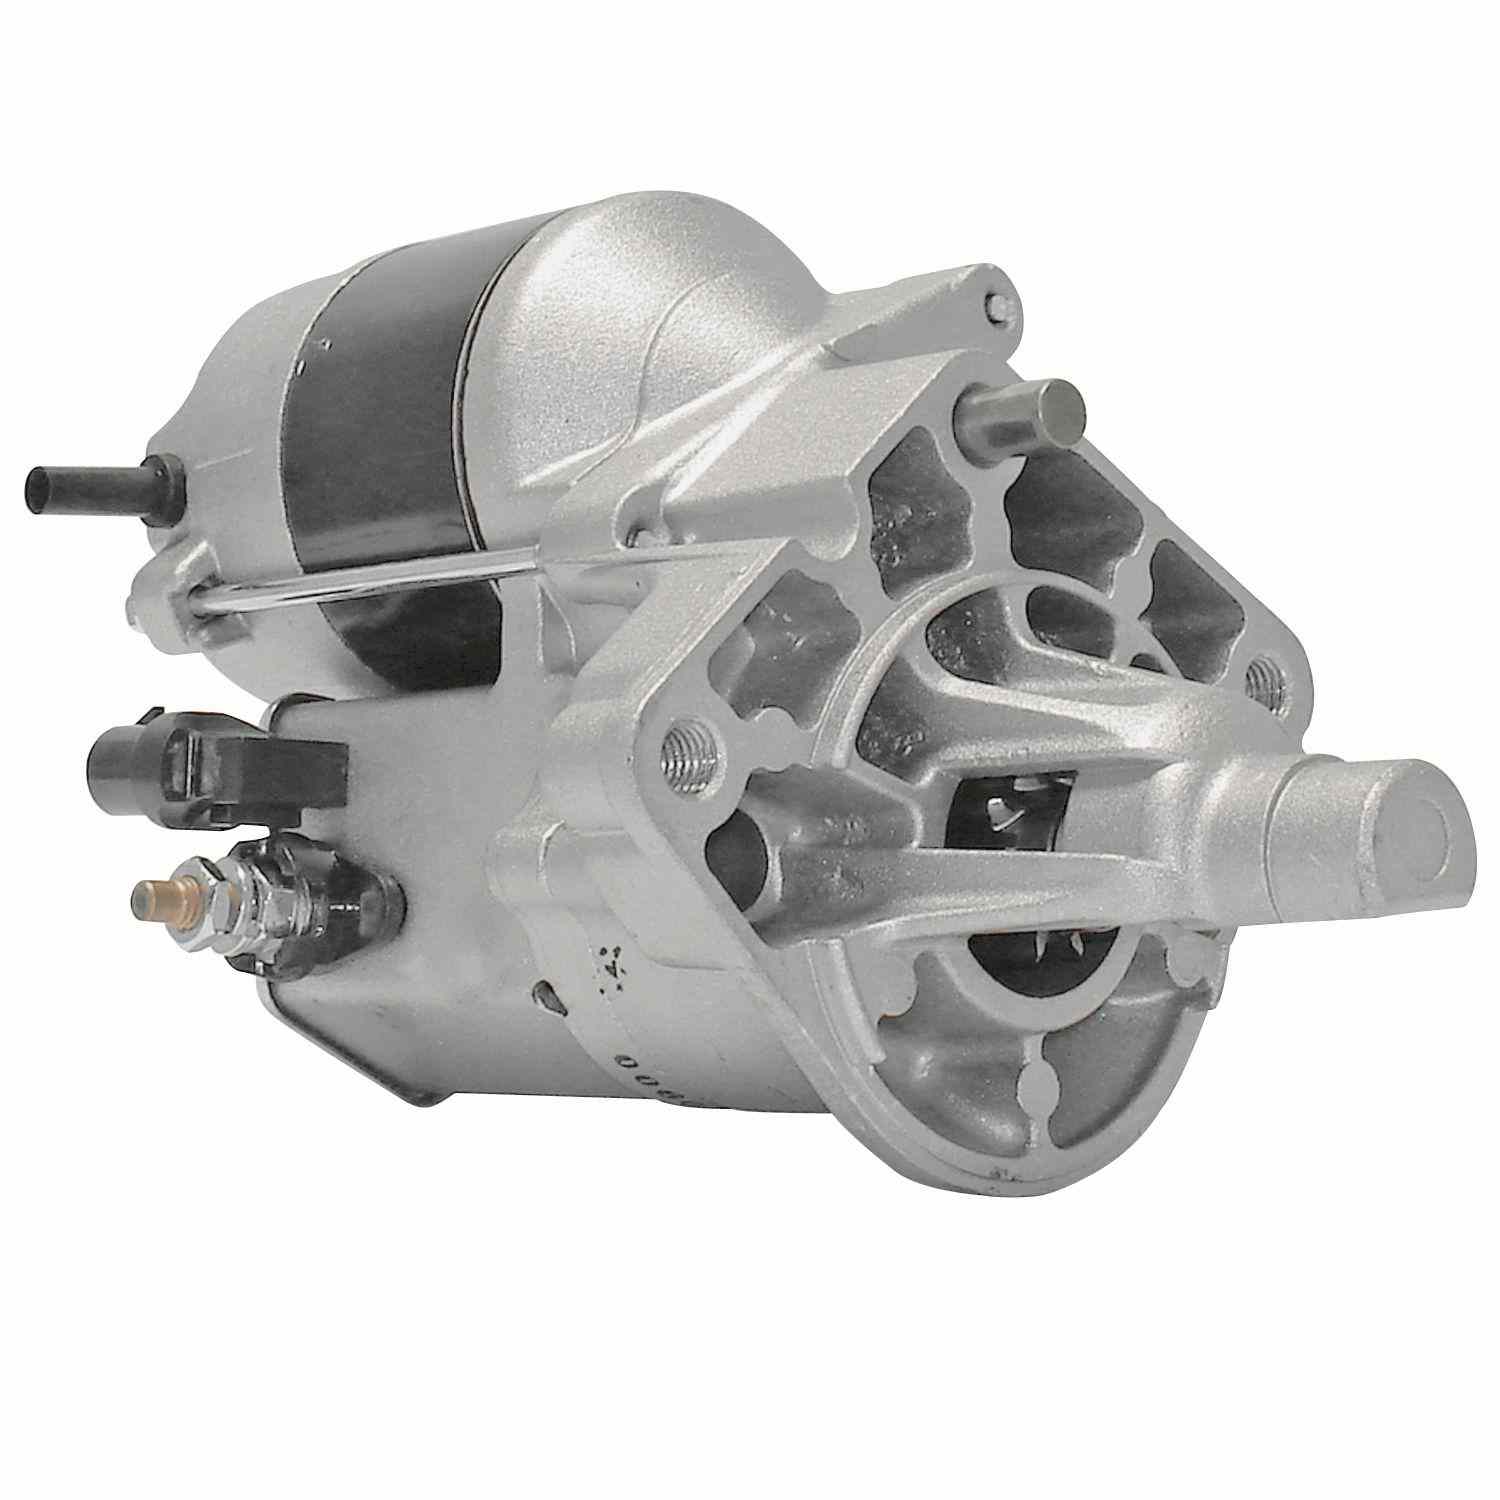 ACDELCO GOLD/PROFESSIONAL - Reman Starter Motor - DCC 336-1721A